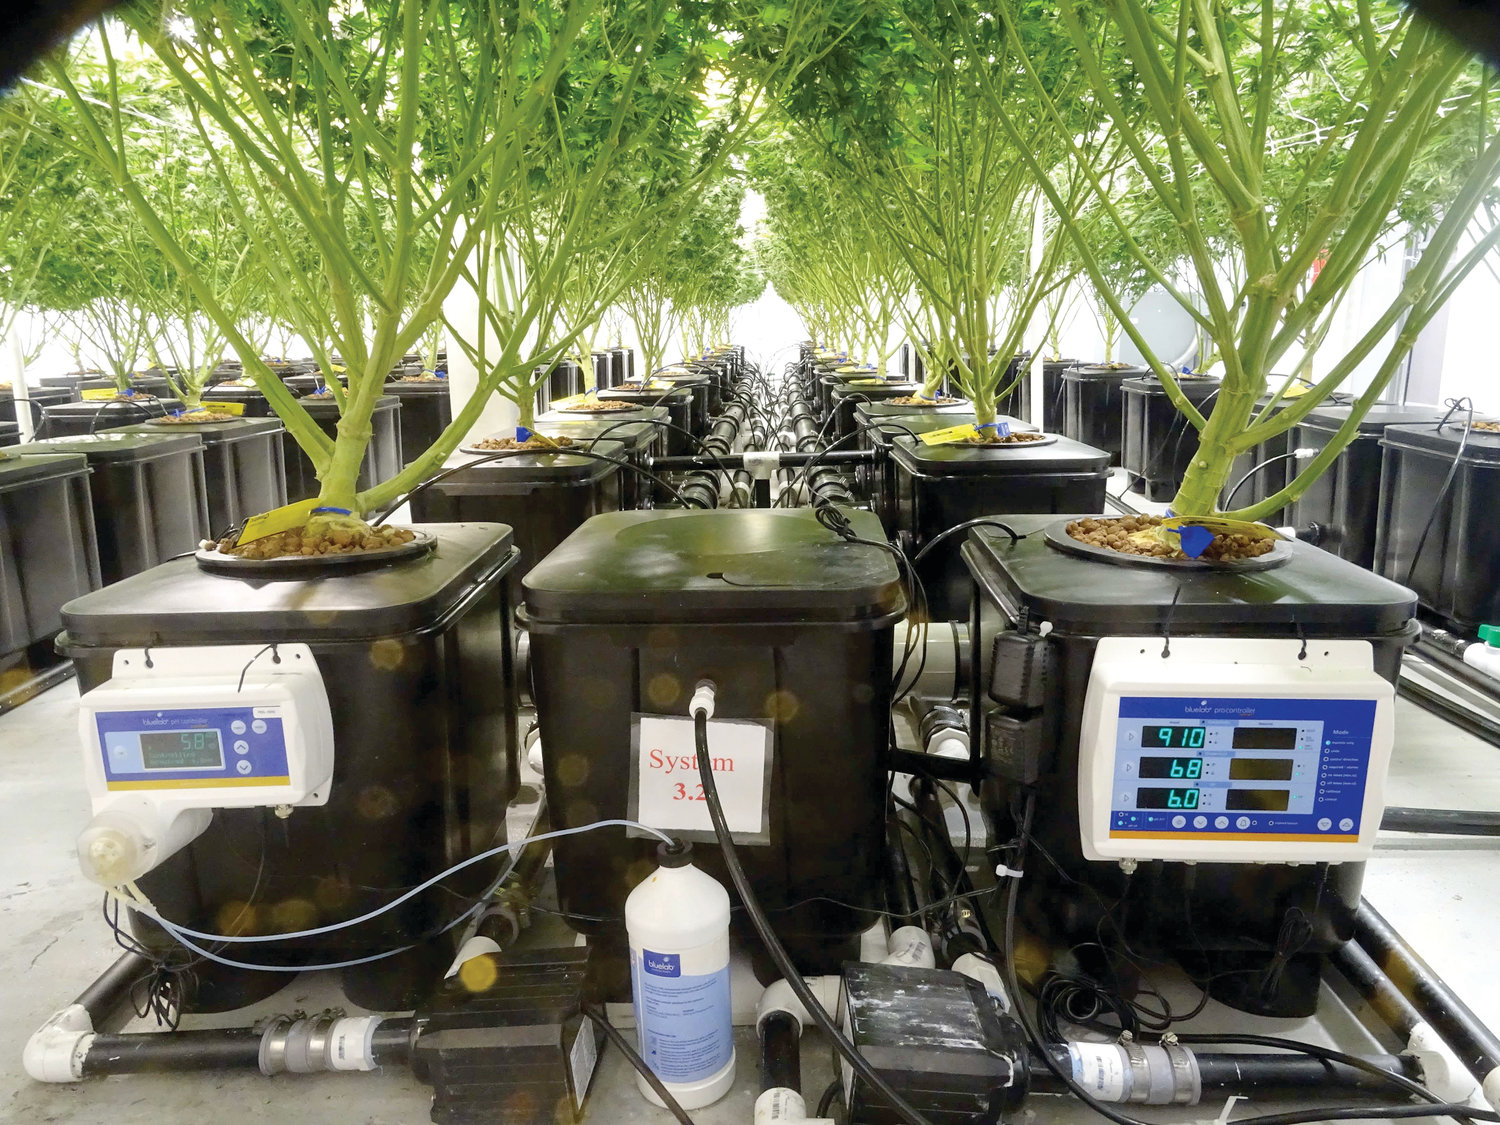 At Lemonati Family Farms on East Kalamazoo Street, plants are grown hydroponically, without soil. The Lansing-based company is licensed or conditionally approved to both grow and process — and eventually sell — cannabis products locally.